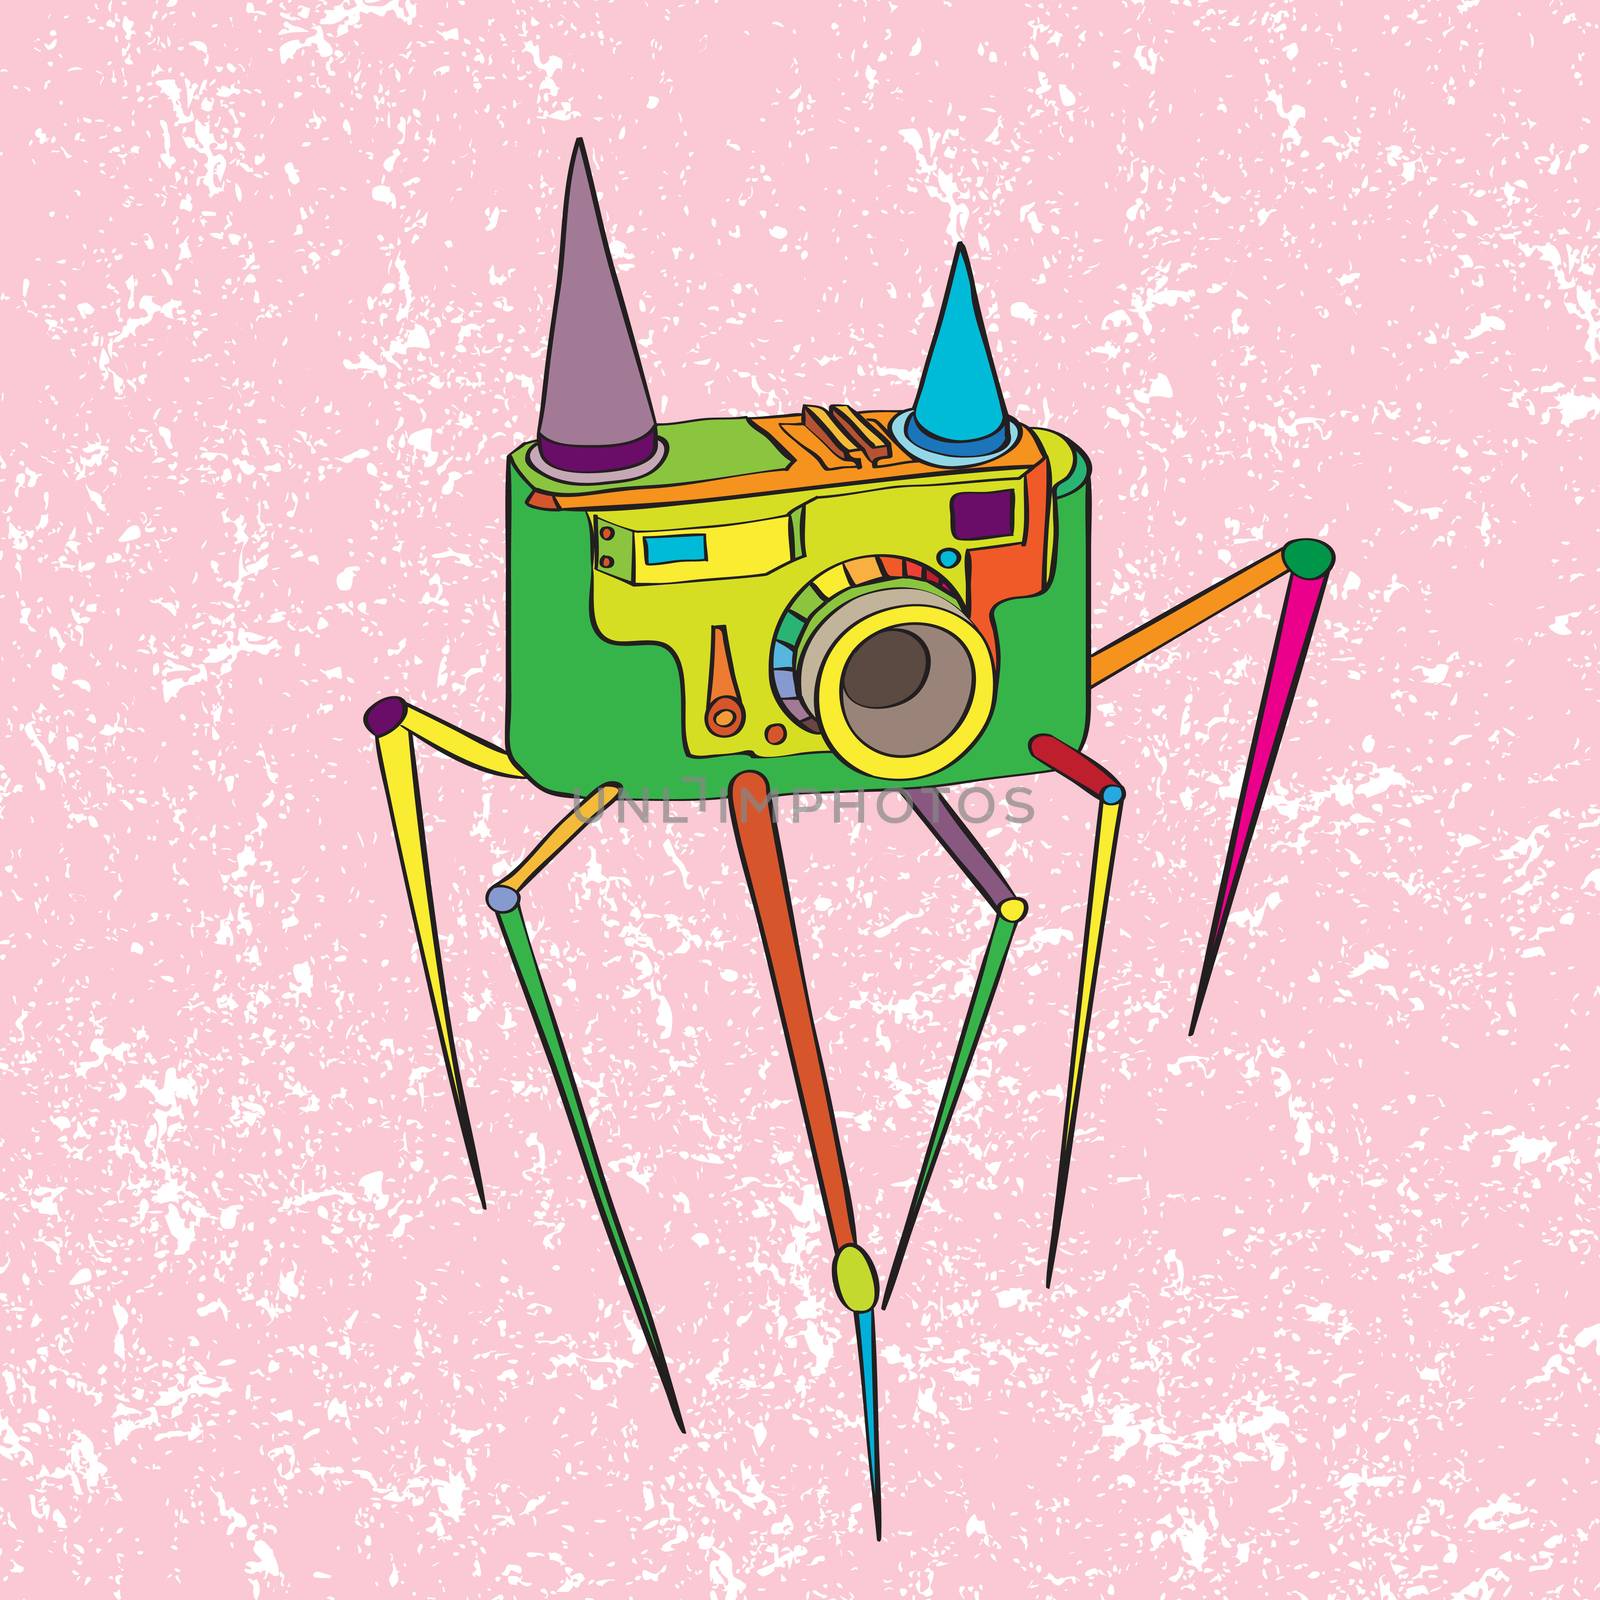 Hand drawn fantastic doodle illustration of a vintage camera with legs over a grungy pink background, surrealist style original art work